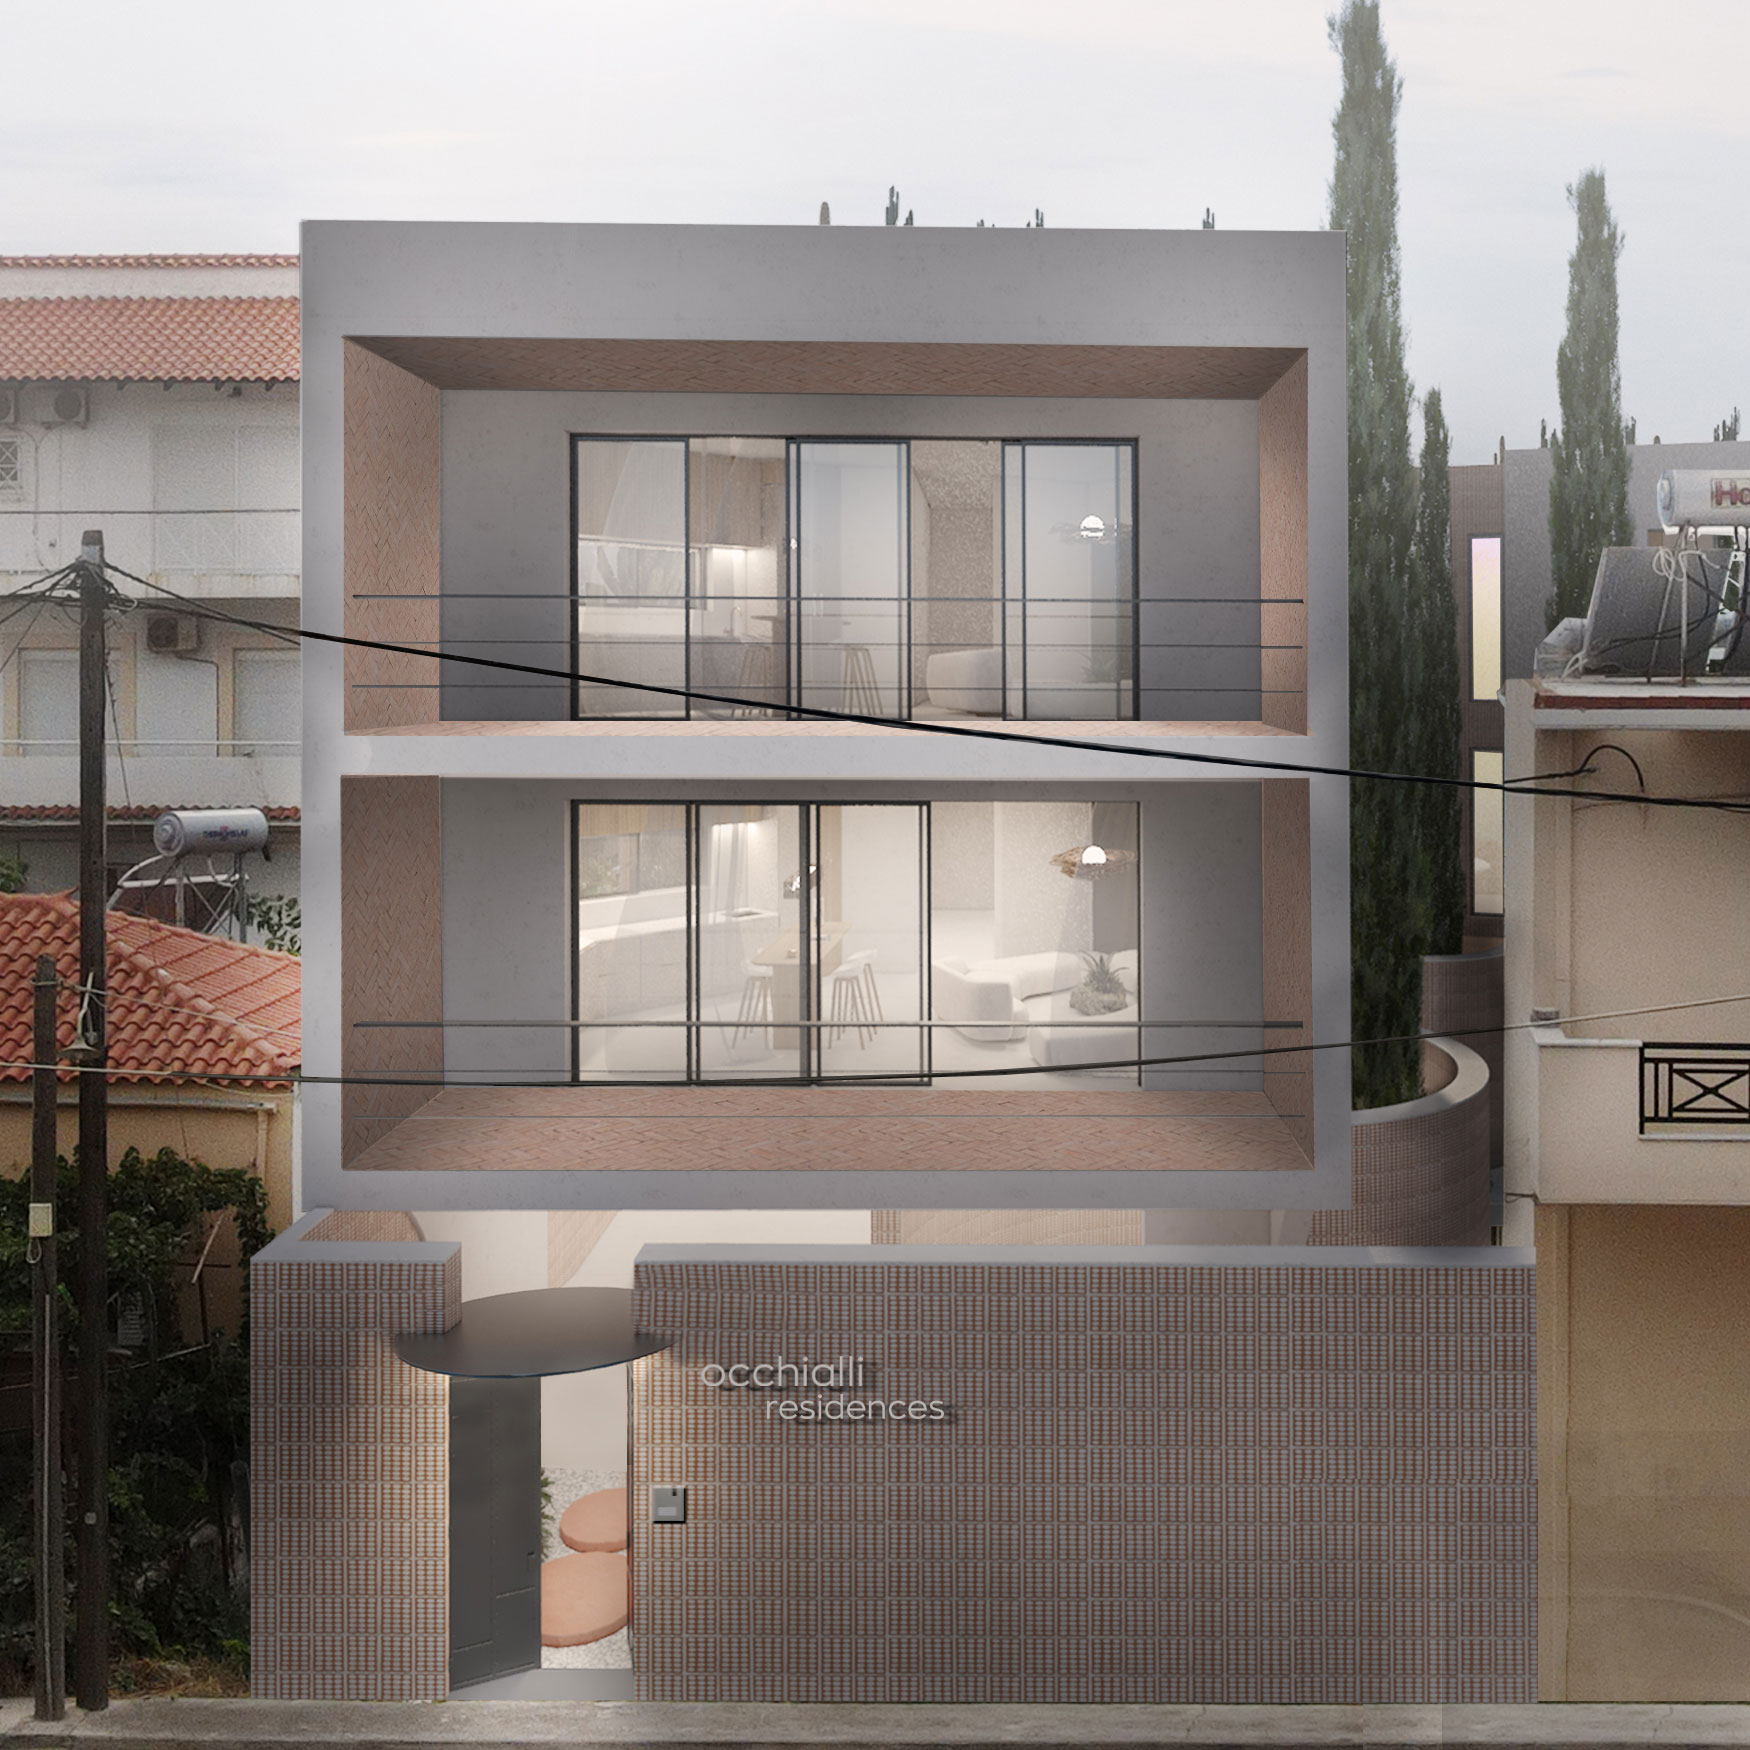 front view render occhiali residence greece the hive architects